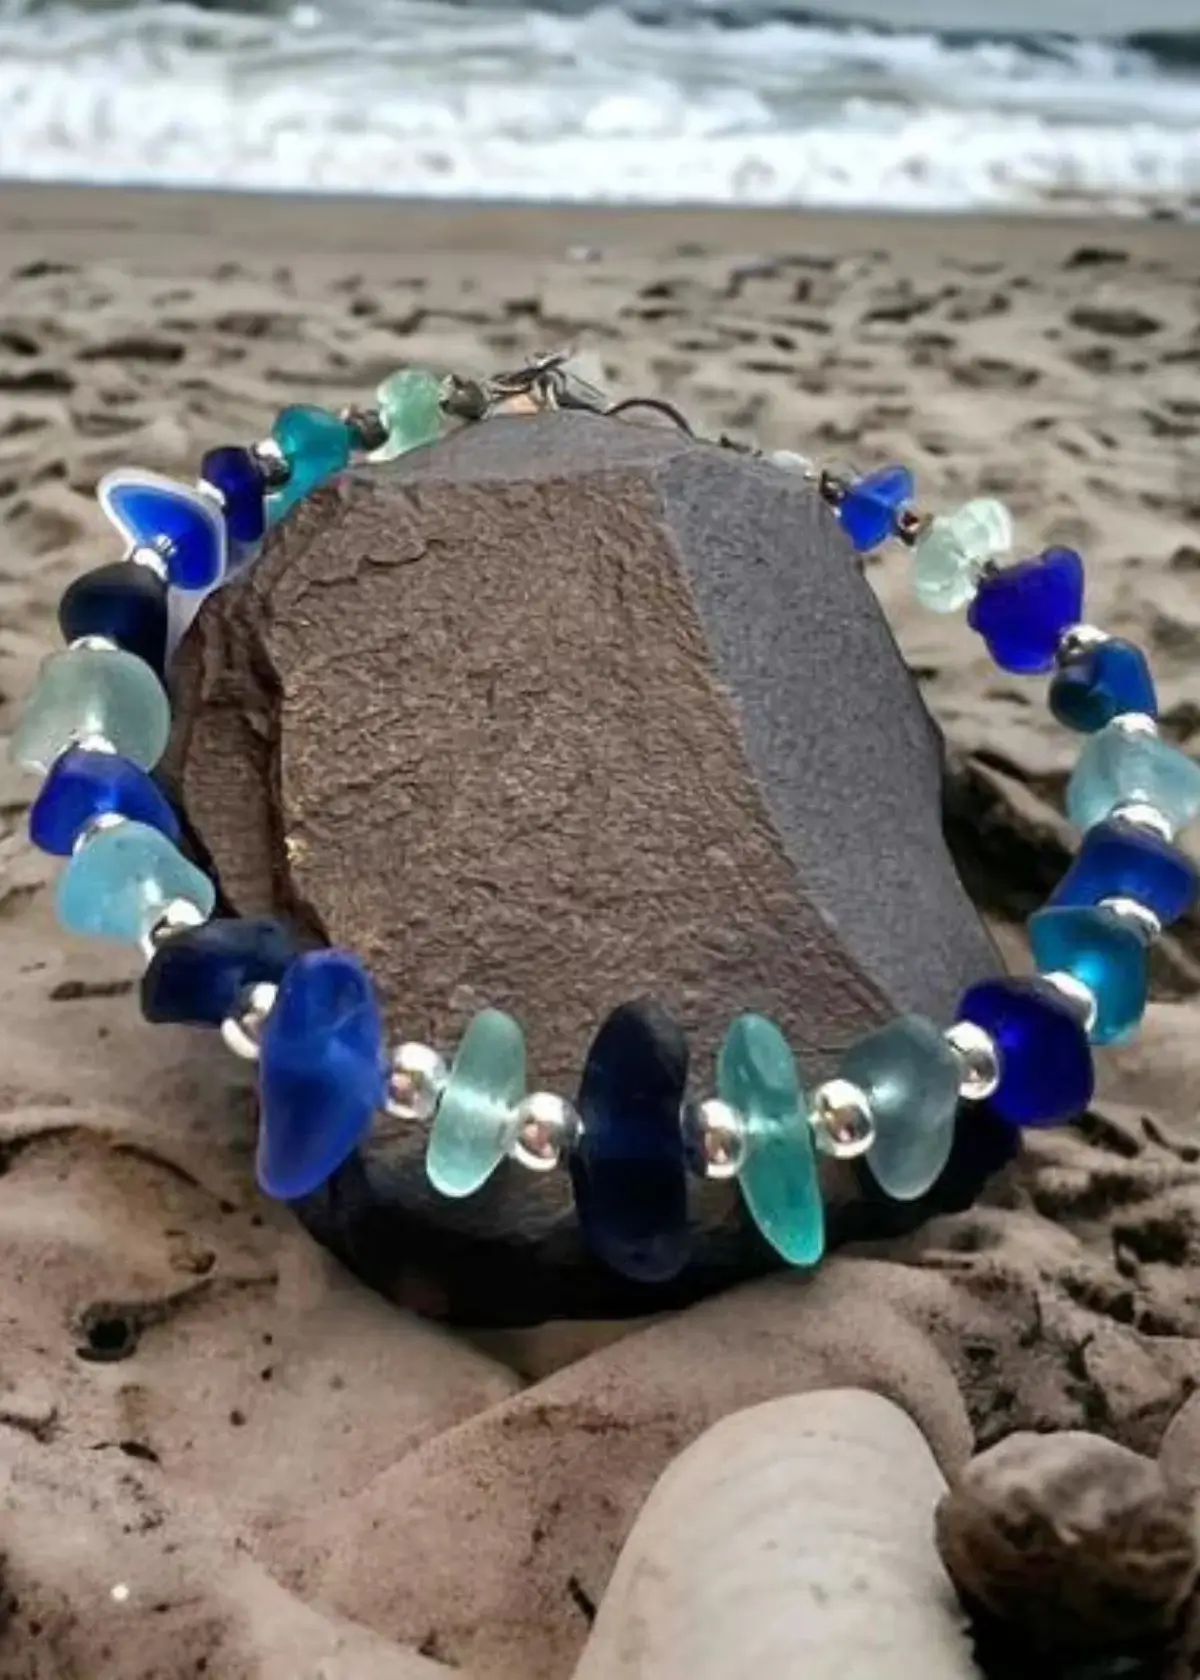 Why is Sea Glass Special?